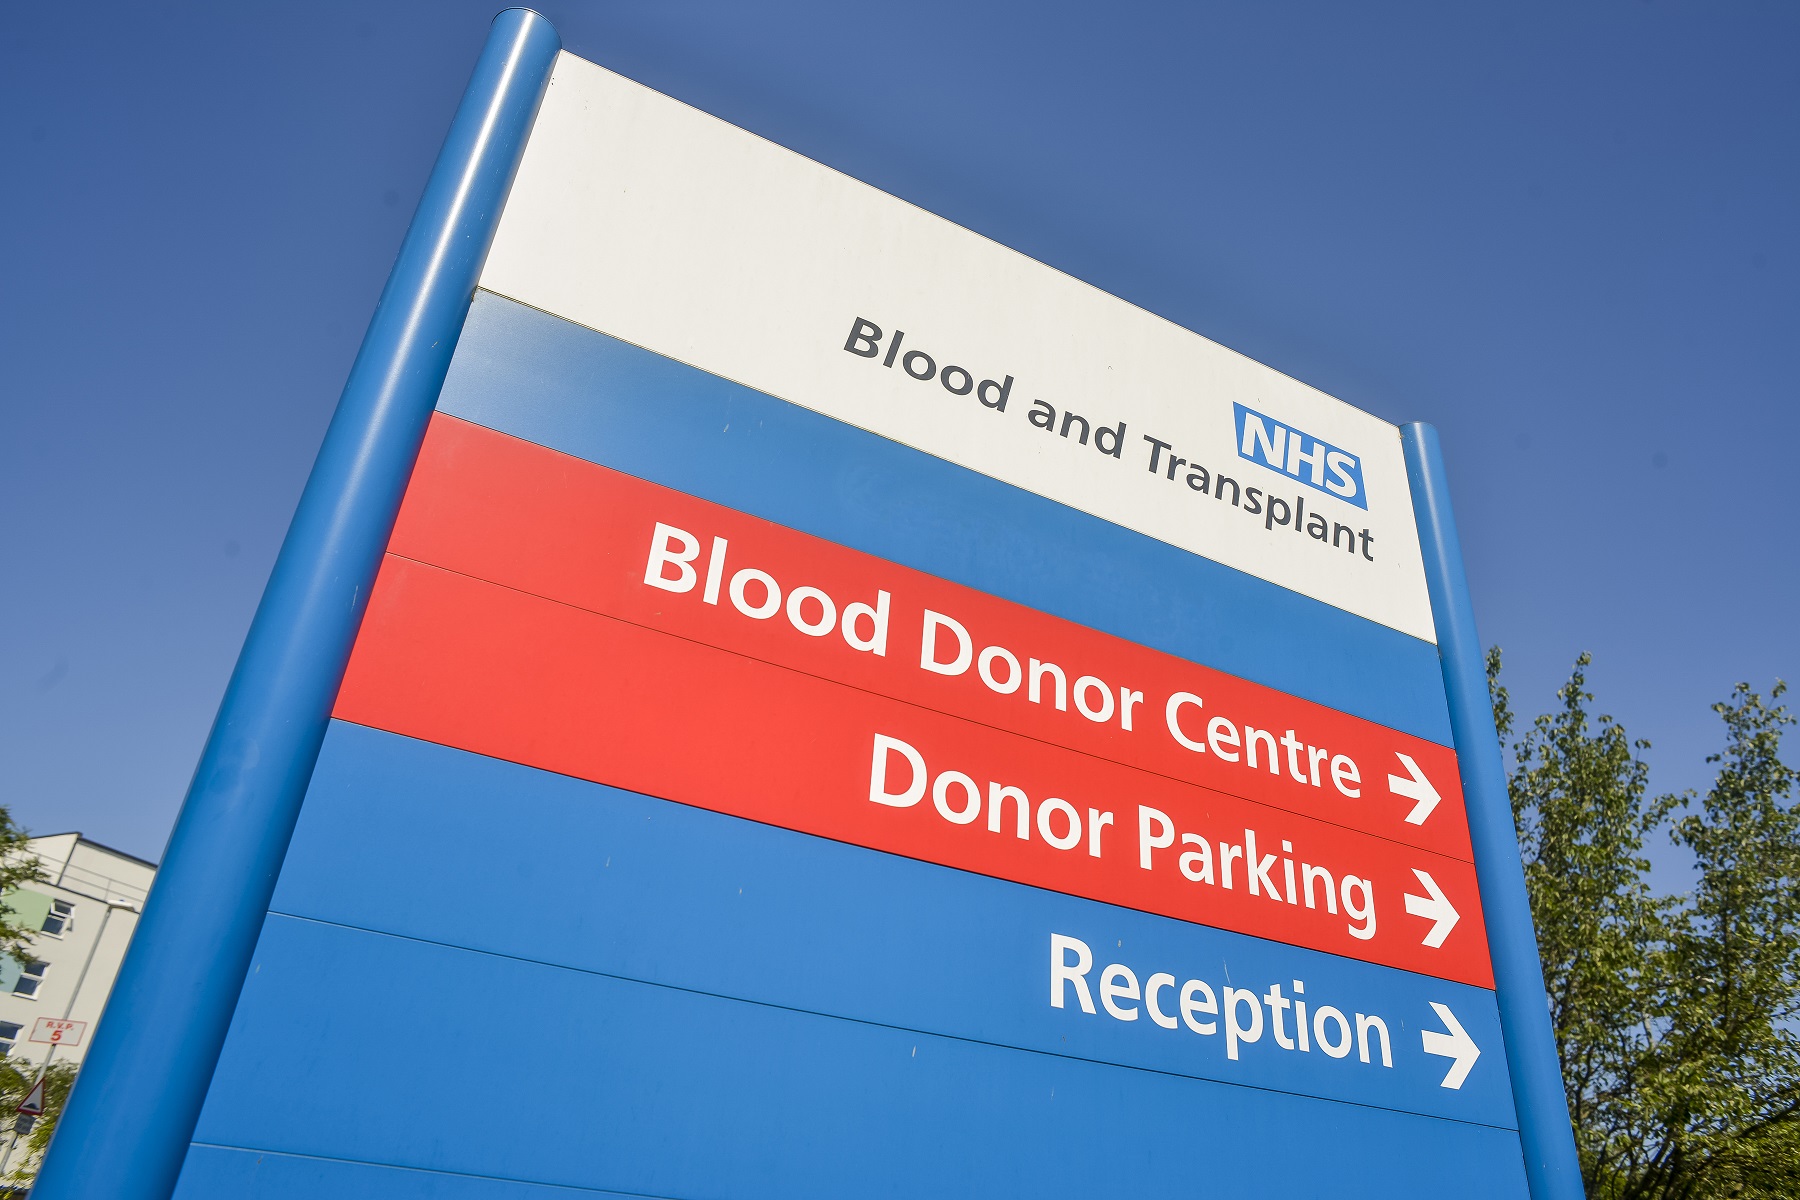 Blood donor centre sign